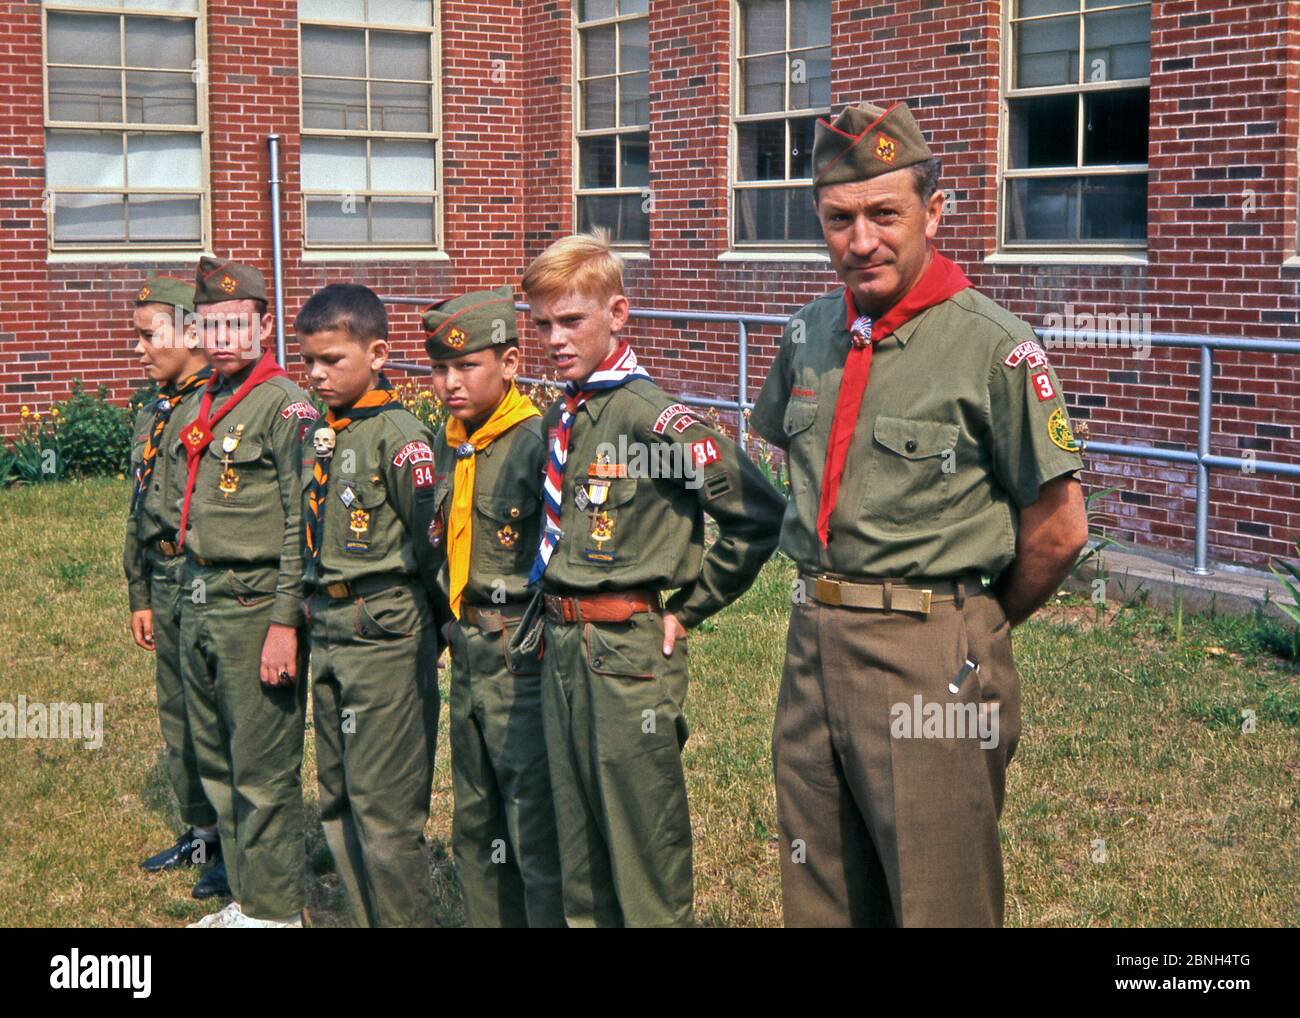 Boy scouts and their leader (Akela) from the Pearl River from number 34 troop (or pack), Pearl River, New York, USA in the mid 60s. The boys display the many badges they have won and wear their distinctive neckerchiefs and slides. The leader has an unusual slide – a Native American in a headdress – whilst the middle boy has a skull slide. Stock Photo